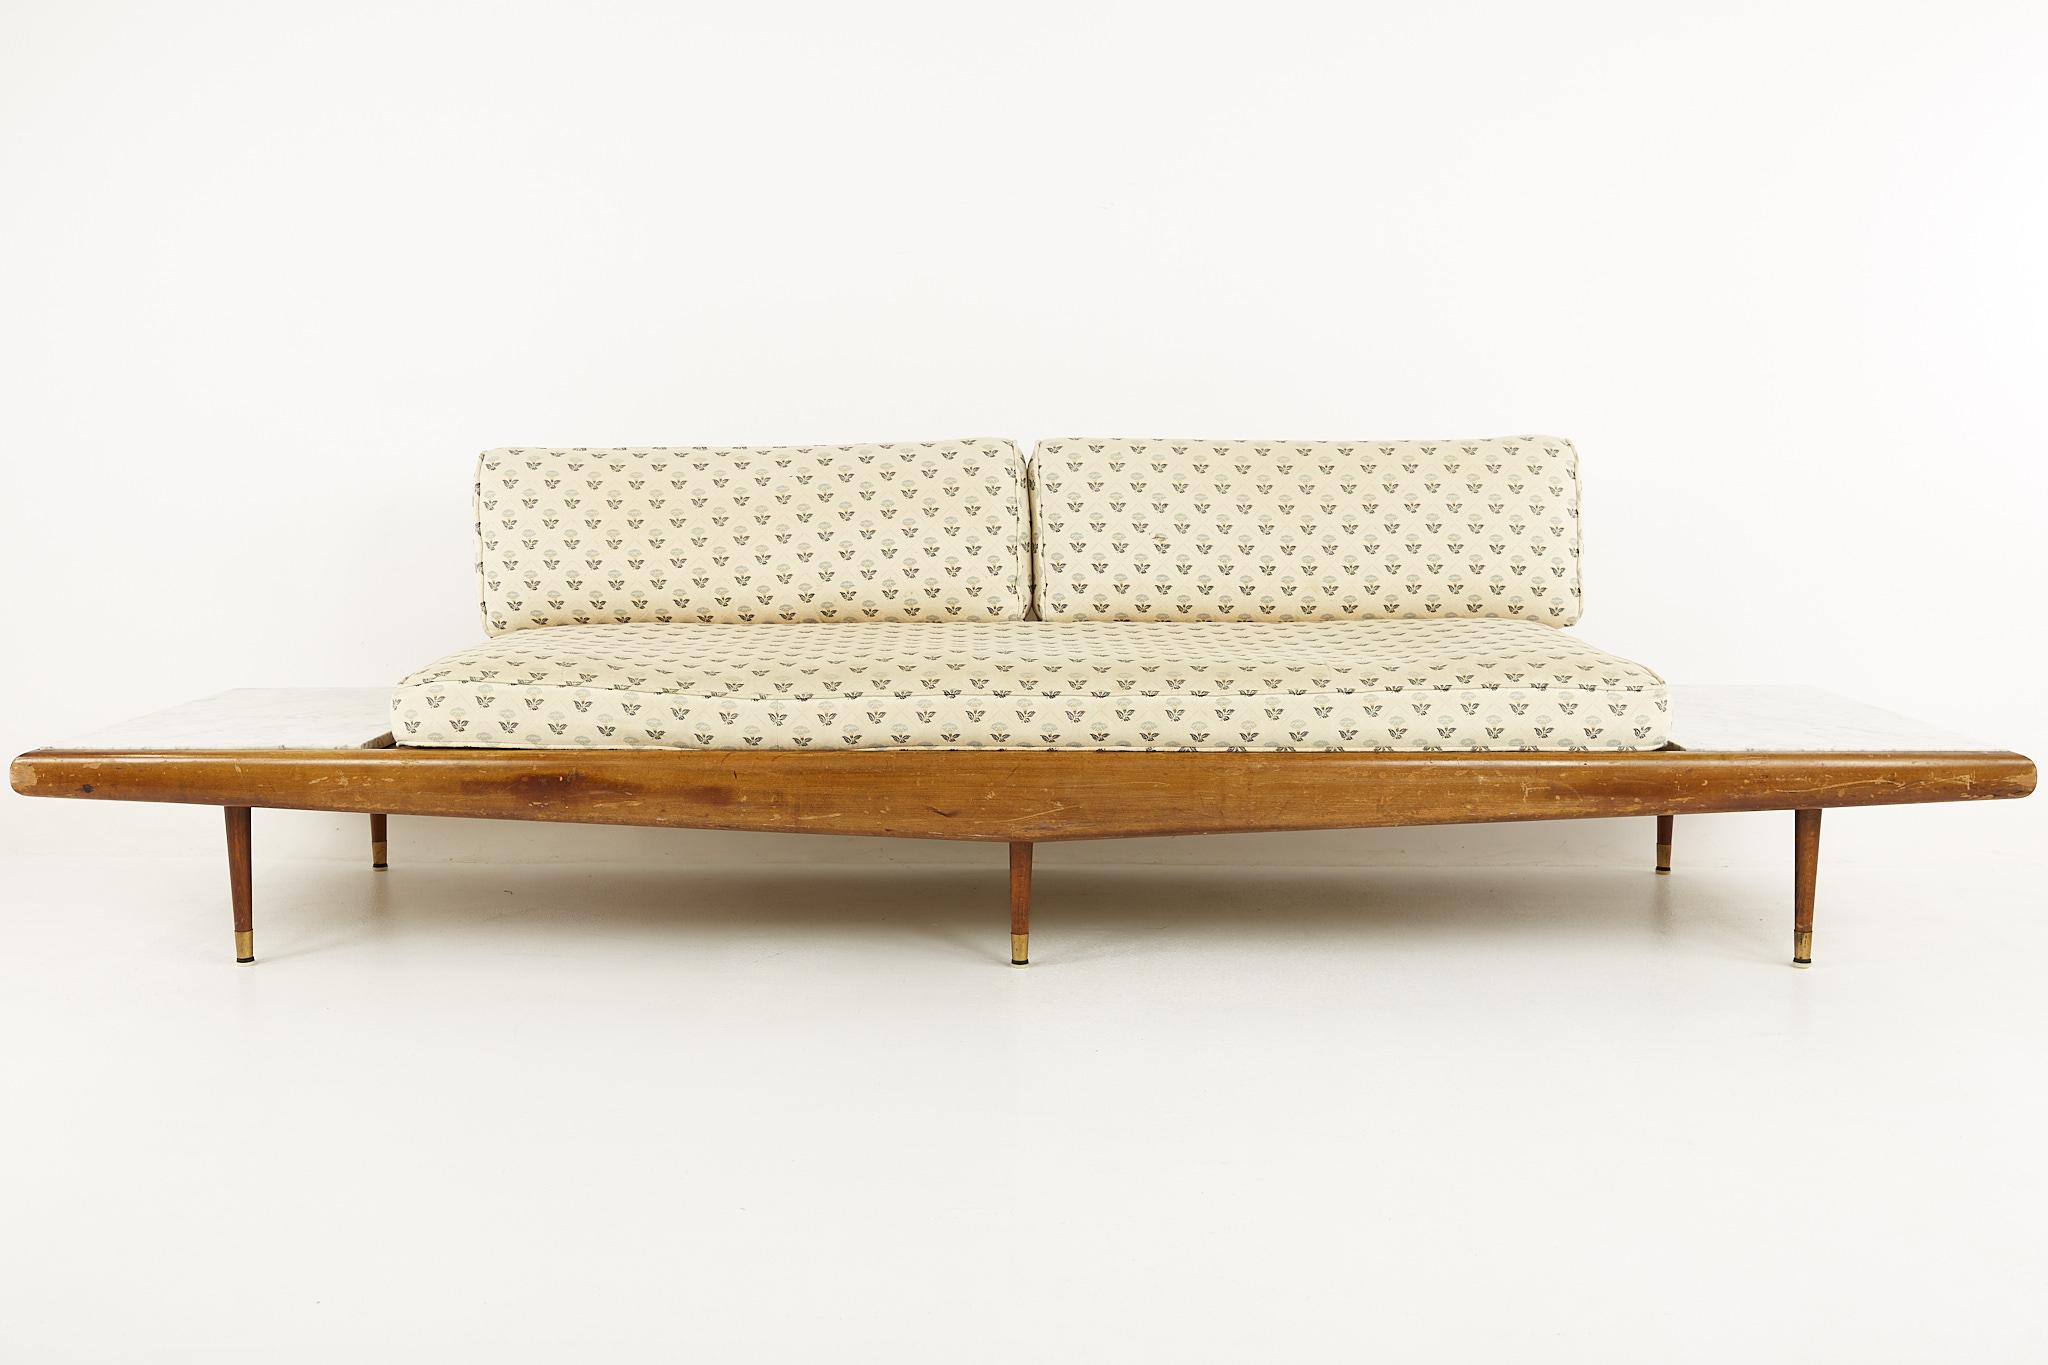 Adrian Pearsall mid century walnut and marble sofa 

The sofa measures: 112 wide x 35 deep x 29 high, with a seat height of 17 inches

All pieces of furniture can be had in what we call restored vintage condition. That means the piece is